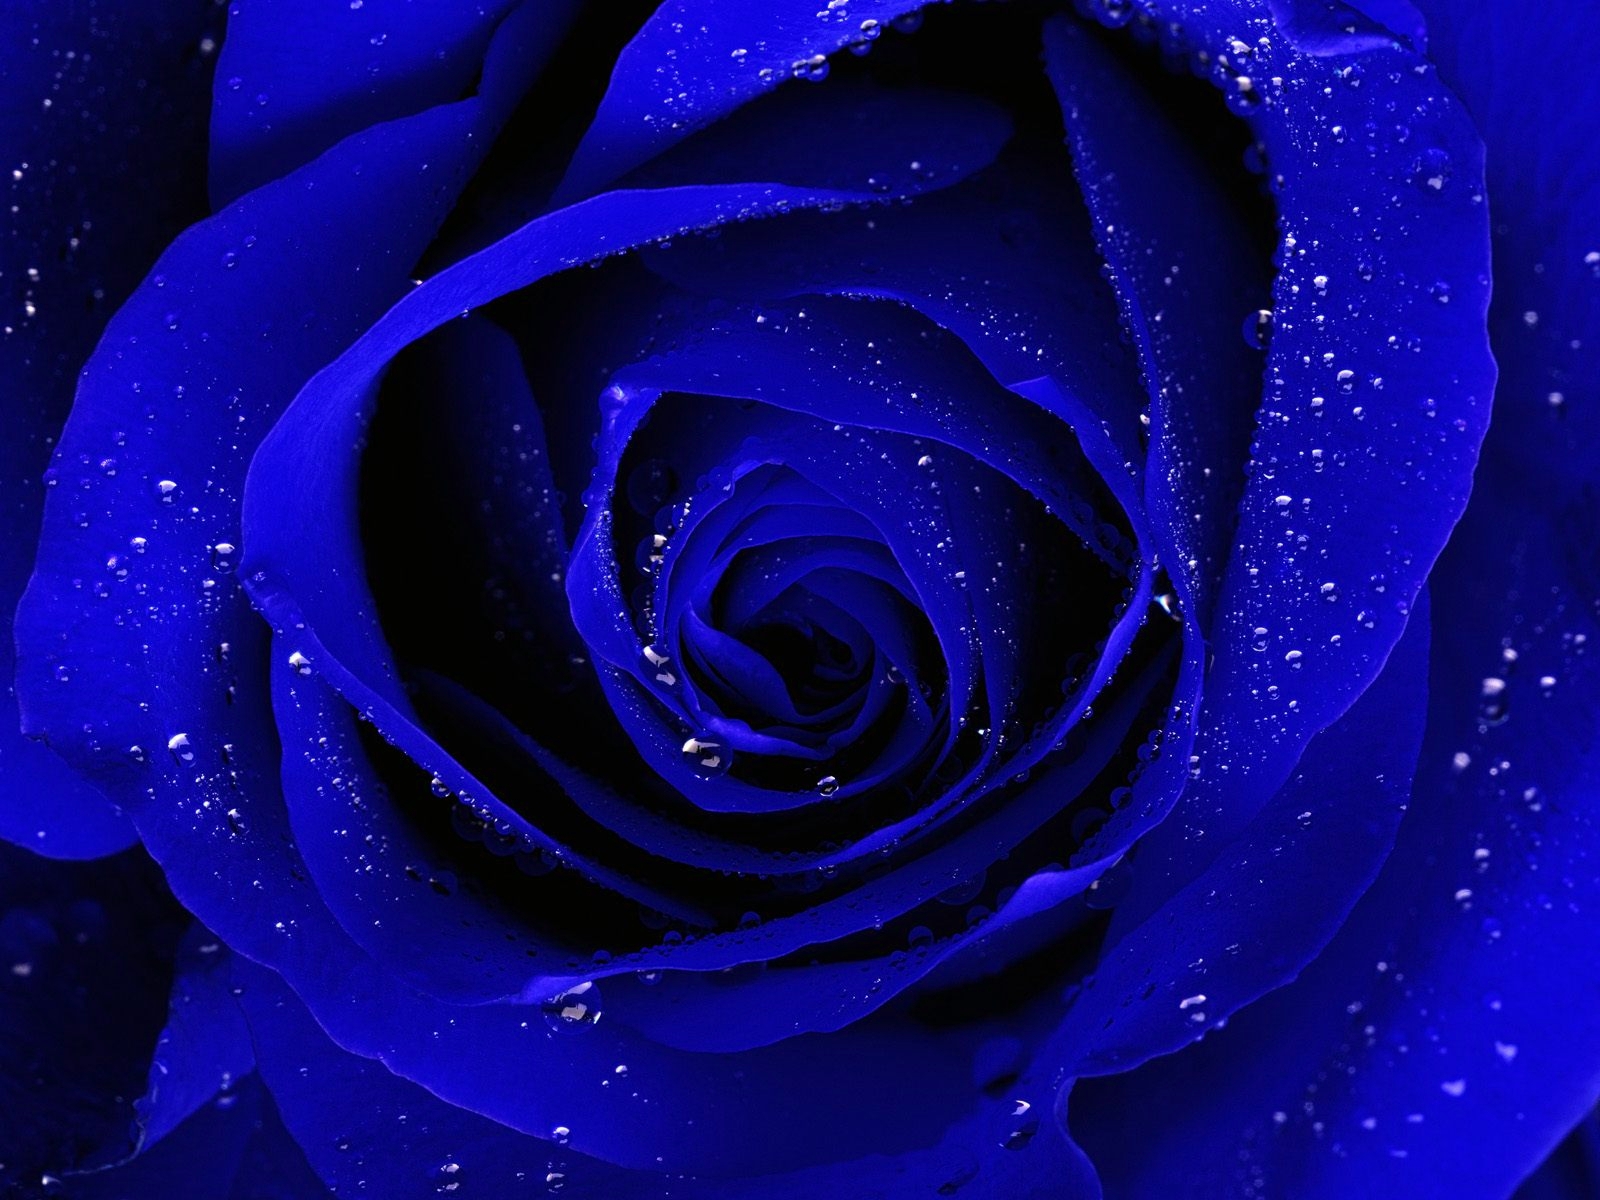 Blue Rose Wallpaper Image Amp Pictures Becuo